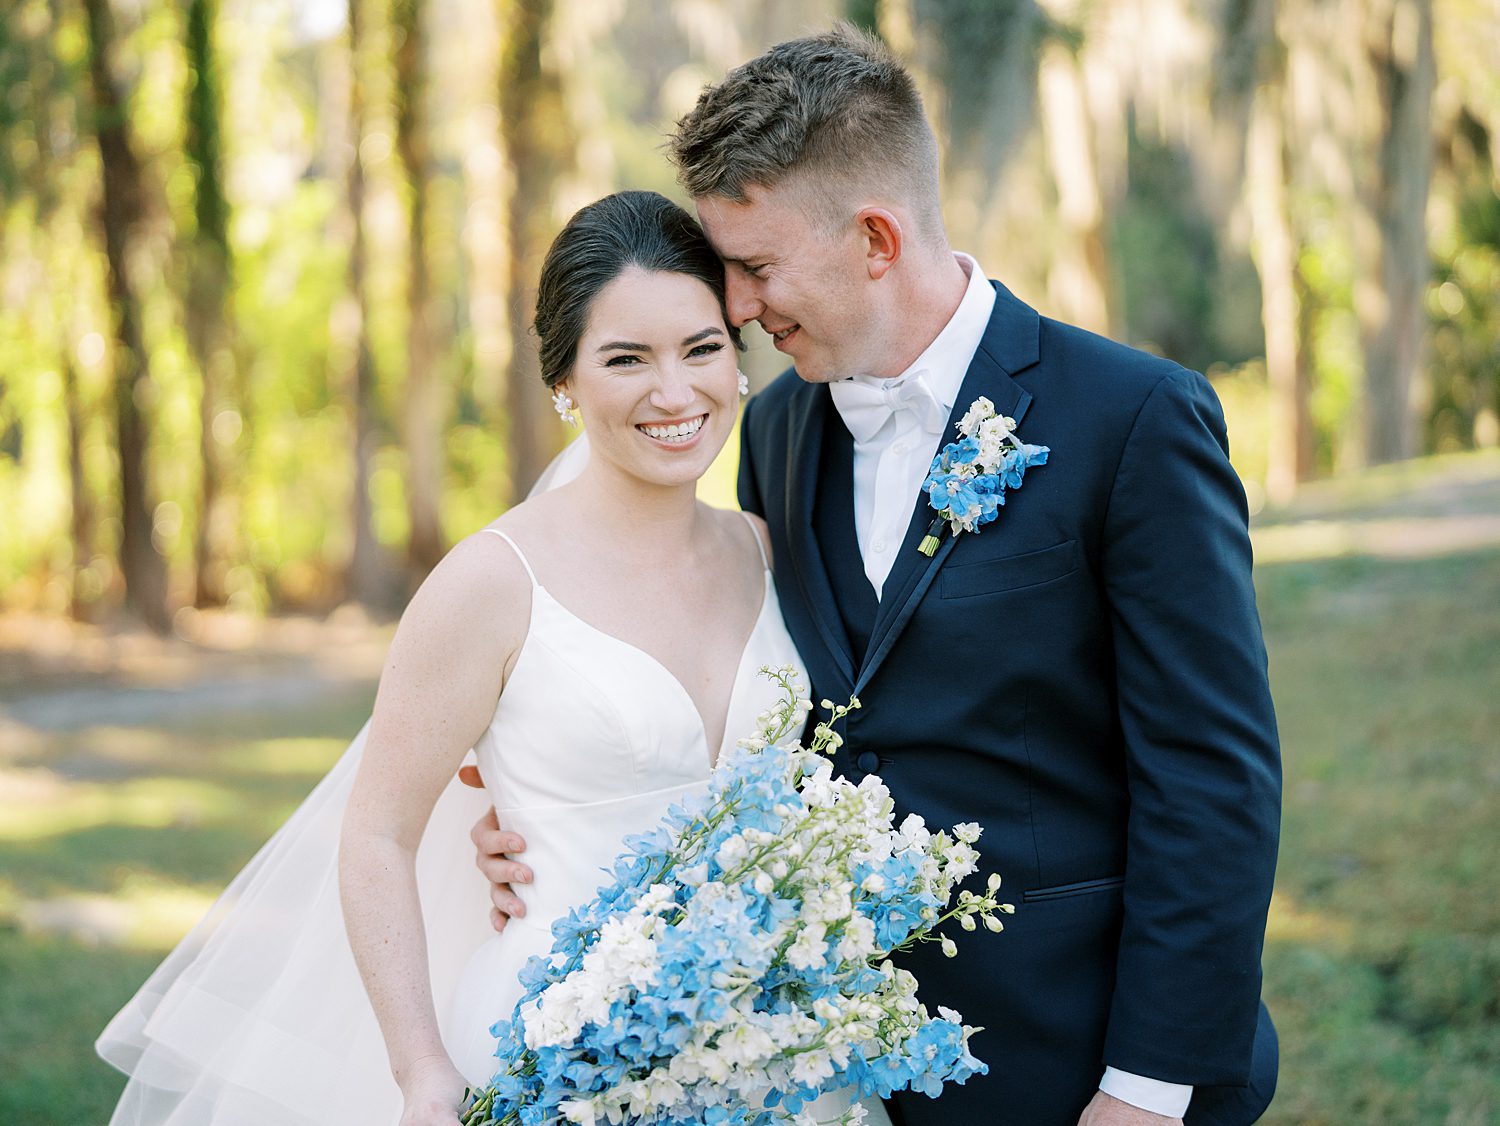 groom nuzzles bride's cheek as she holds blue and white bouquet